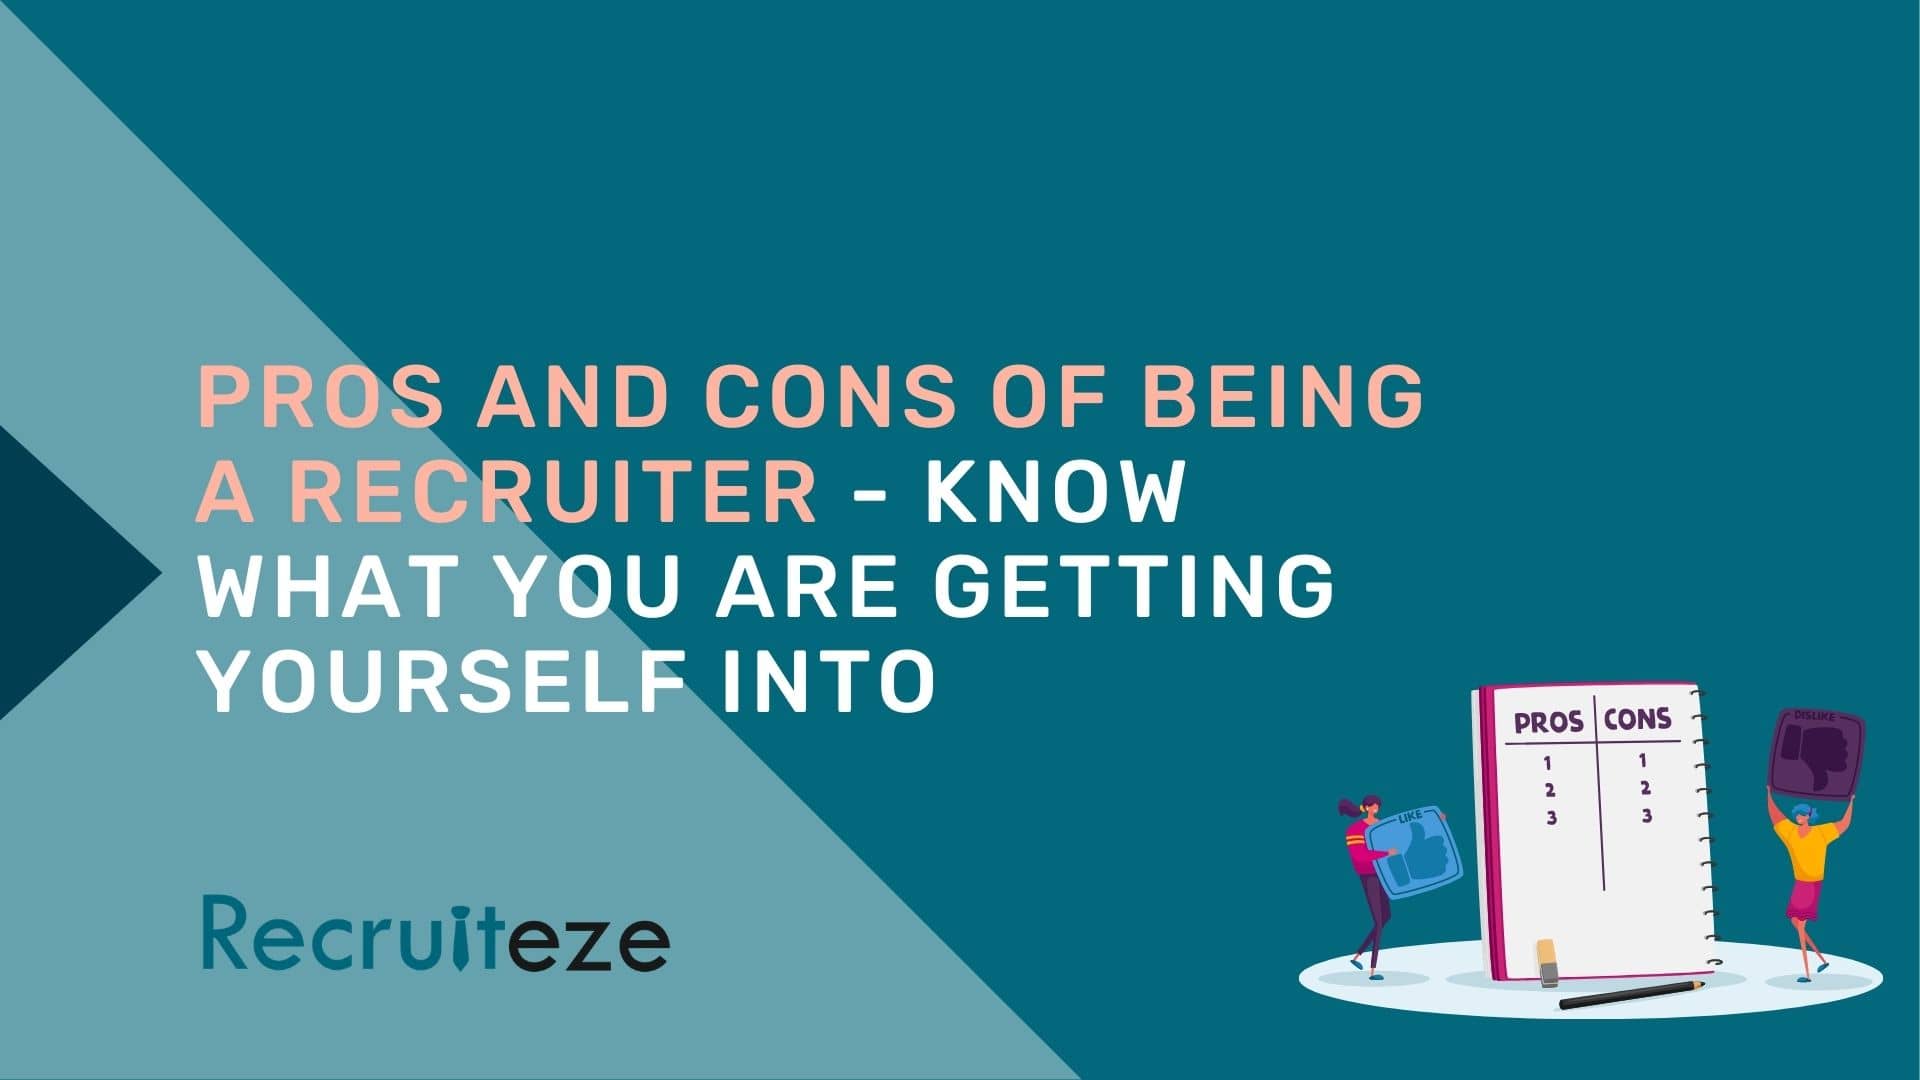 Pros And Cons Of Being A Recruiter - Know What You Are Getting Yourself Into